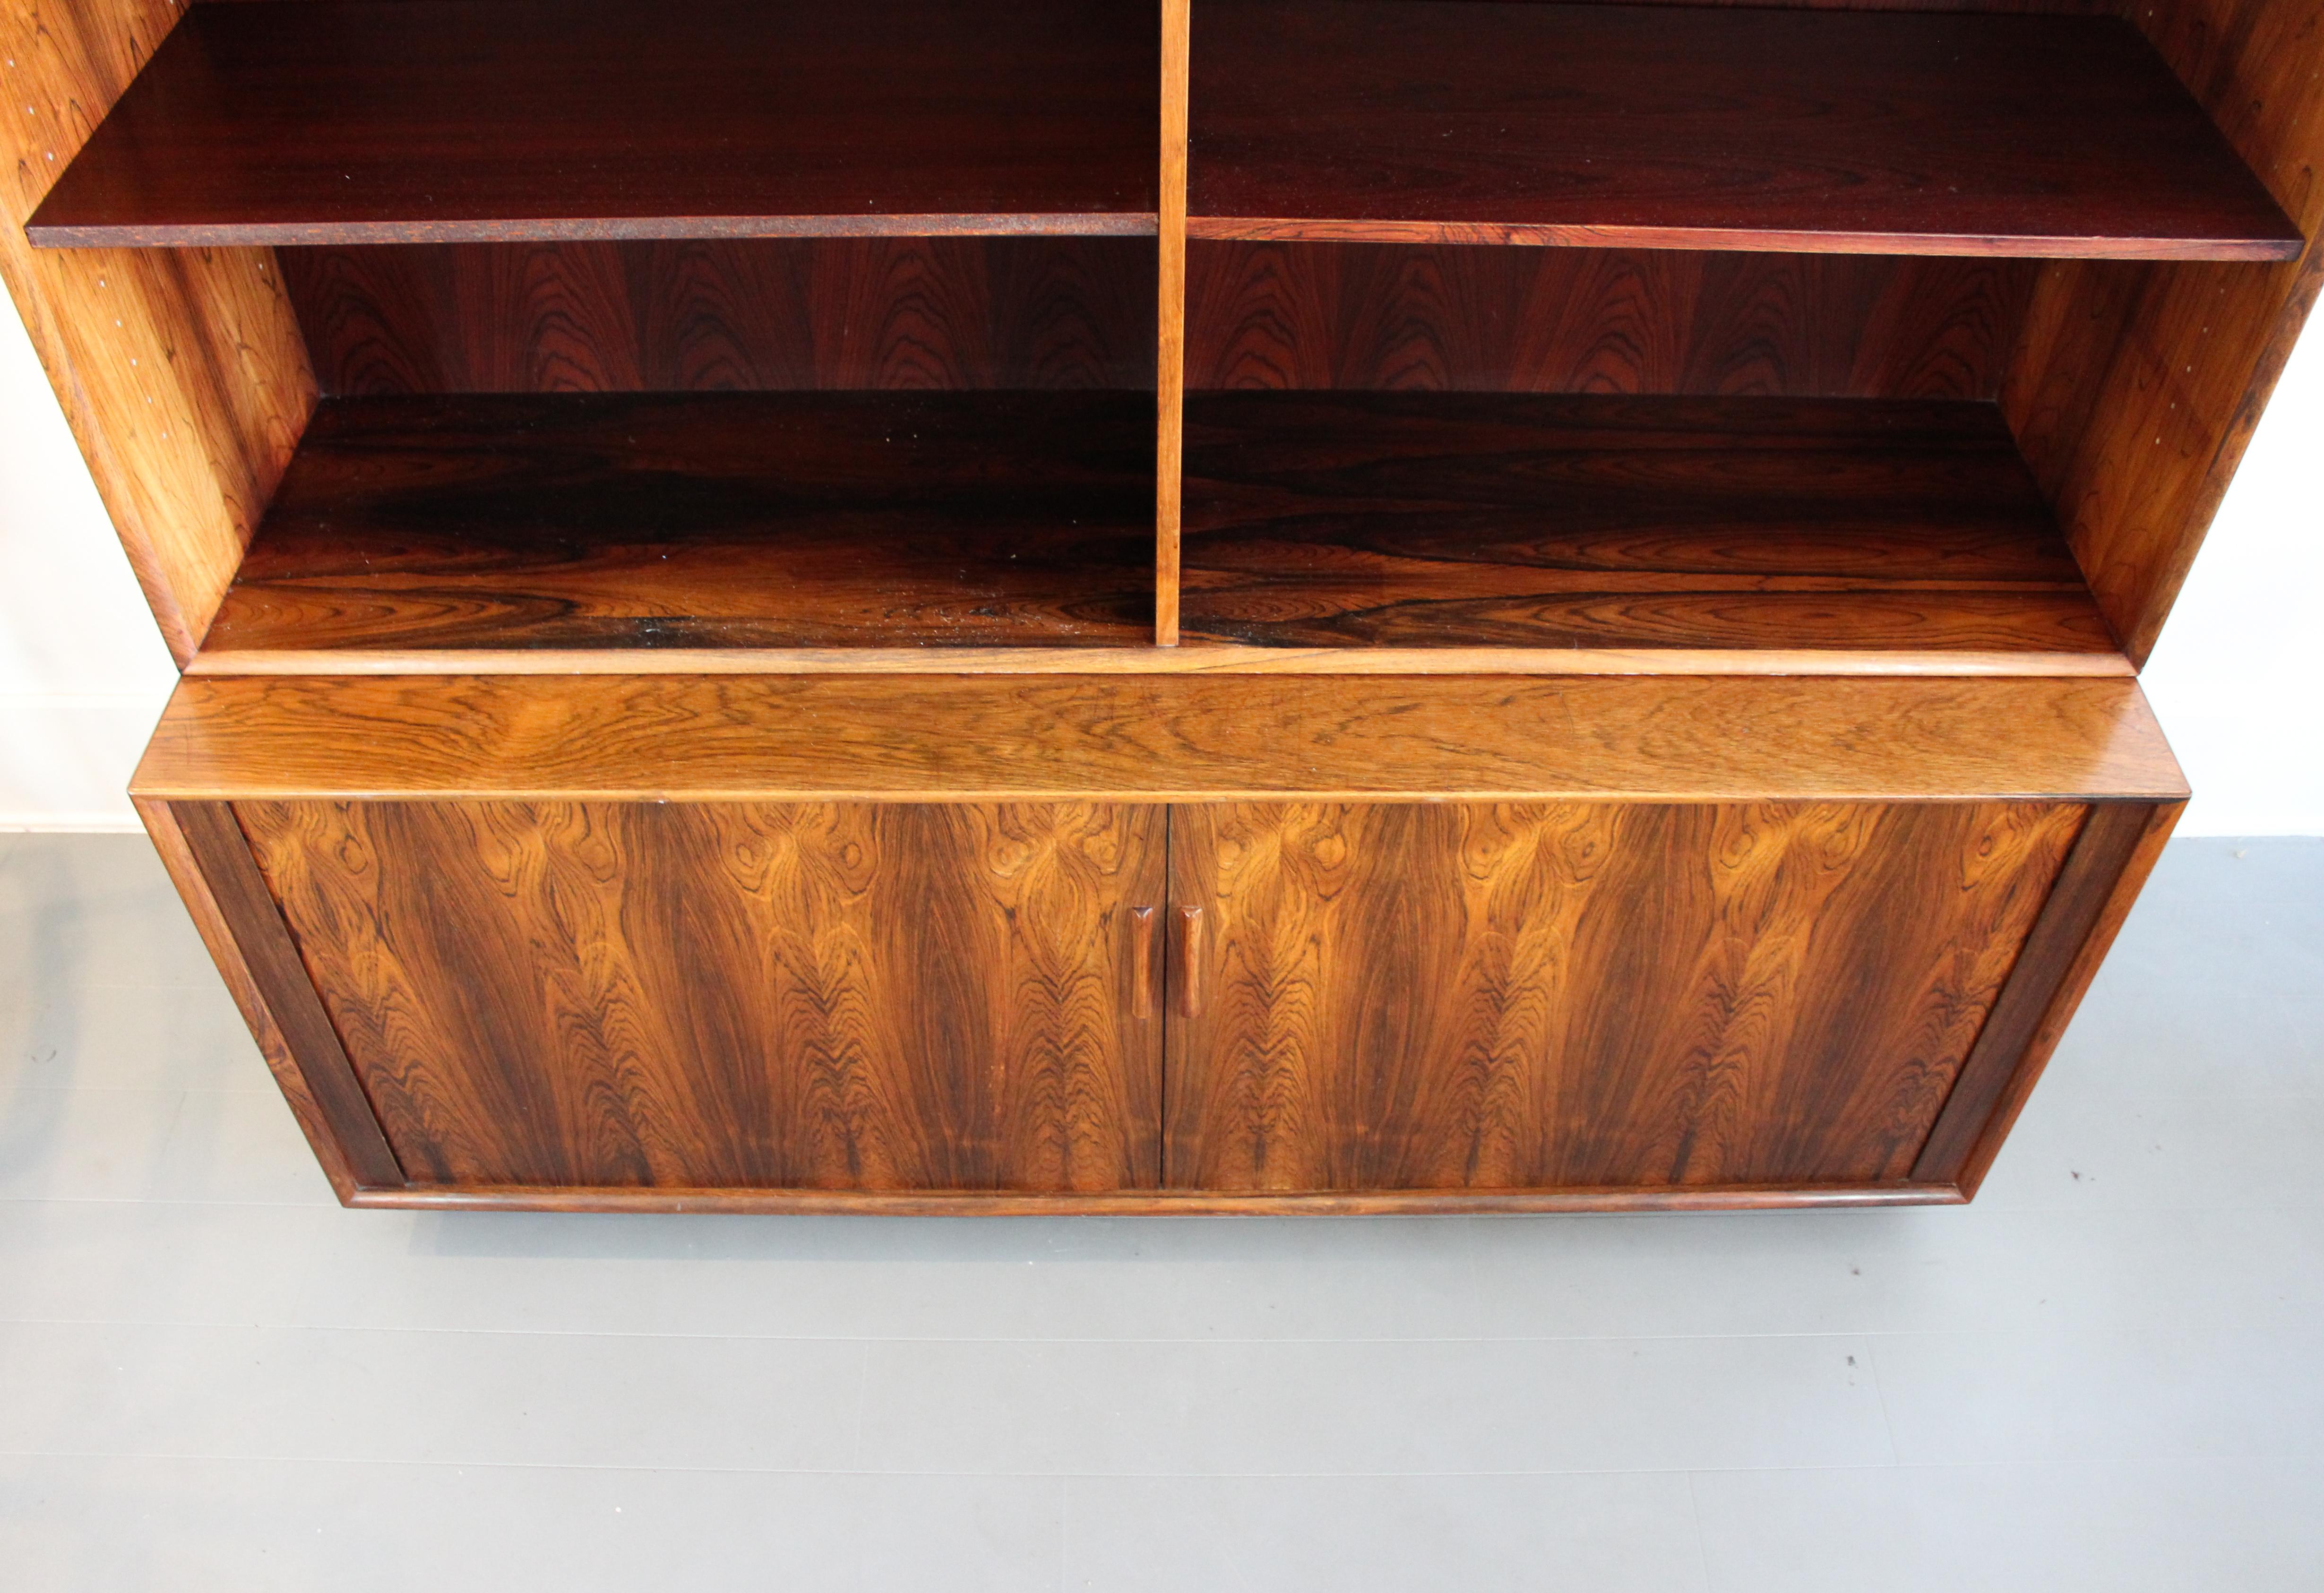 Midcentury Rosewood Arne Vodder Book Case with Tambour Doors by Sibast, 1950s For Sale 2